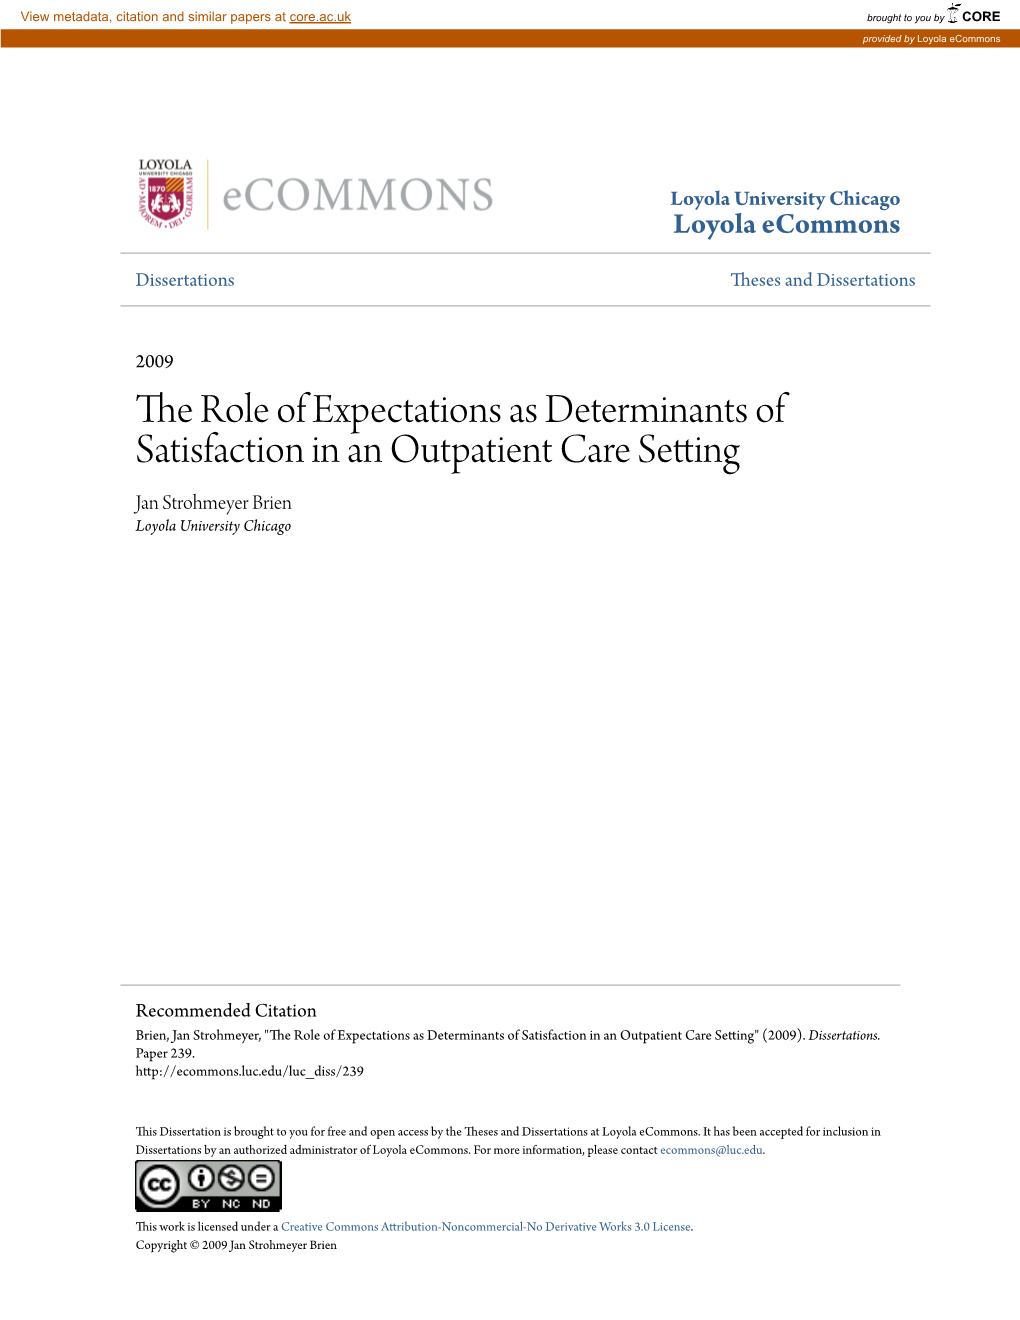 The Role of Expectations As Determinants of Satisfaction in an Outpatient Care Setting Jan Strohmeyer Brien Loyola University Chicago